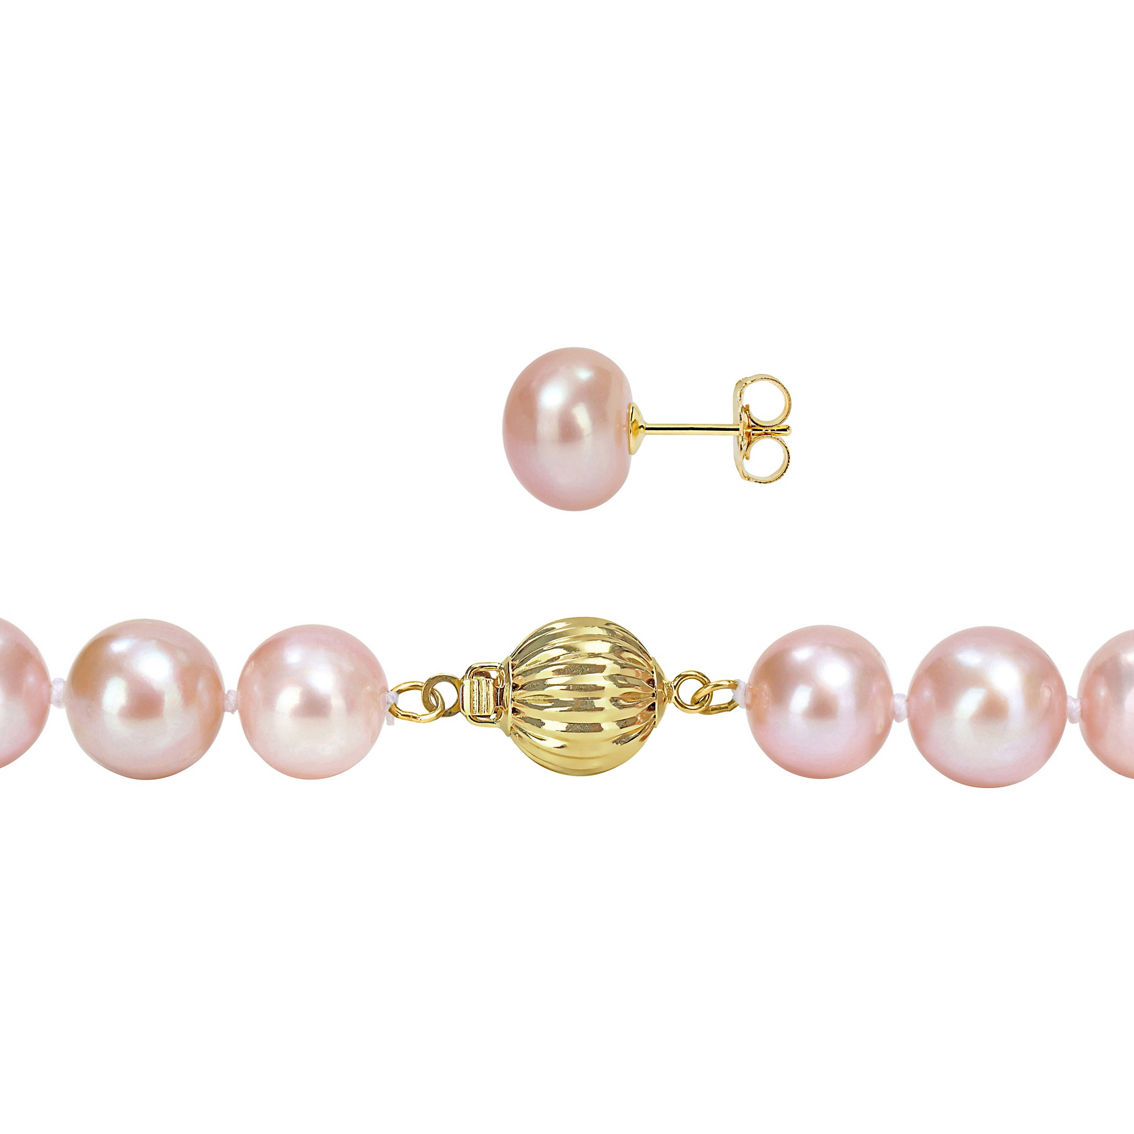 Sofia B. 14K Gold Pink Cultured Freshwater Pearl Strand Necklace and Earring Set - Image 2 of 5